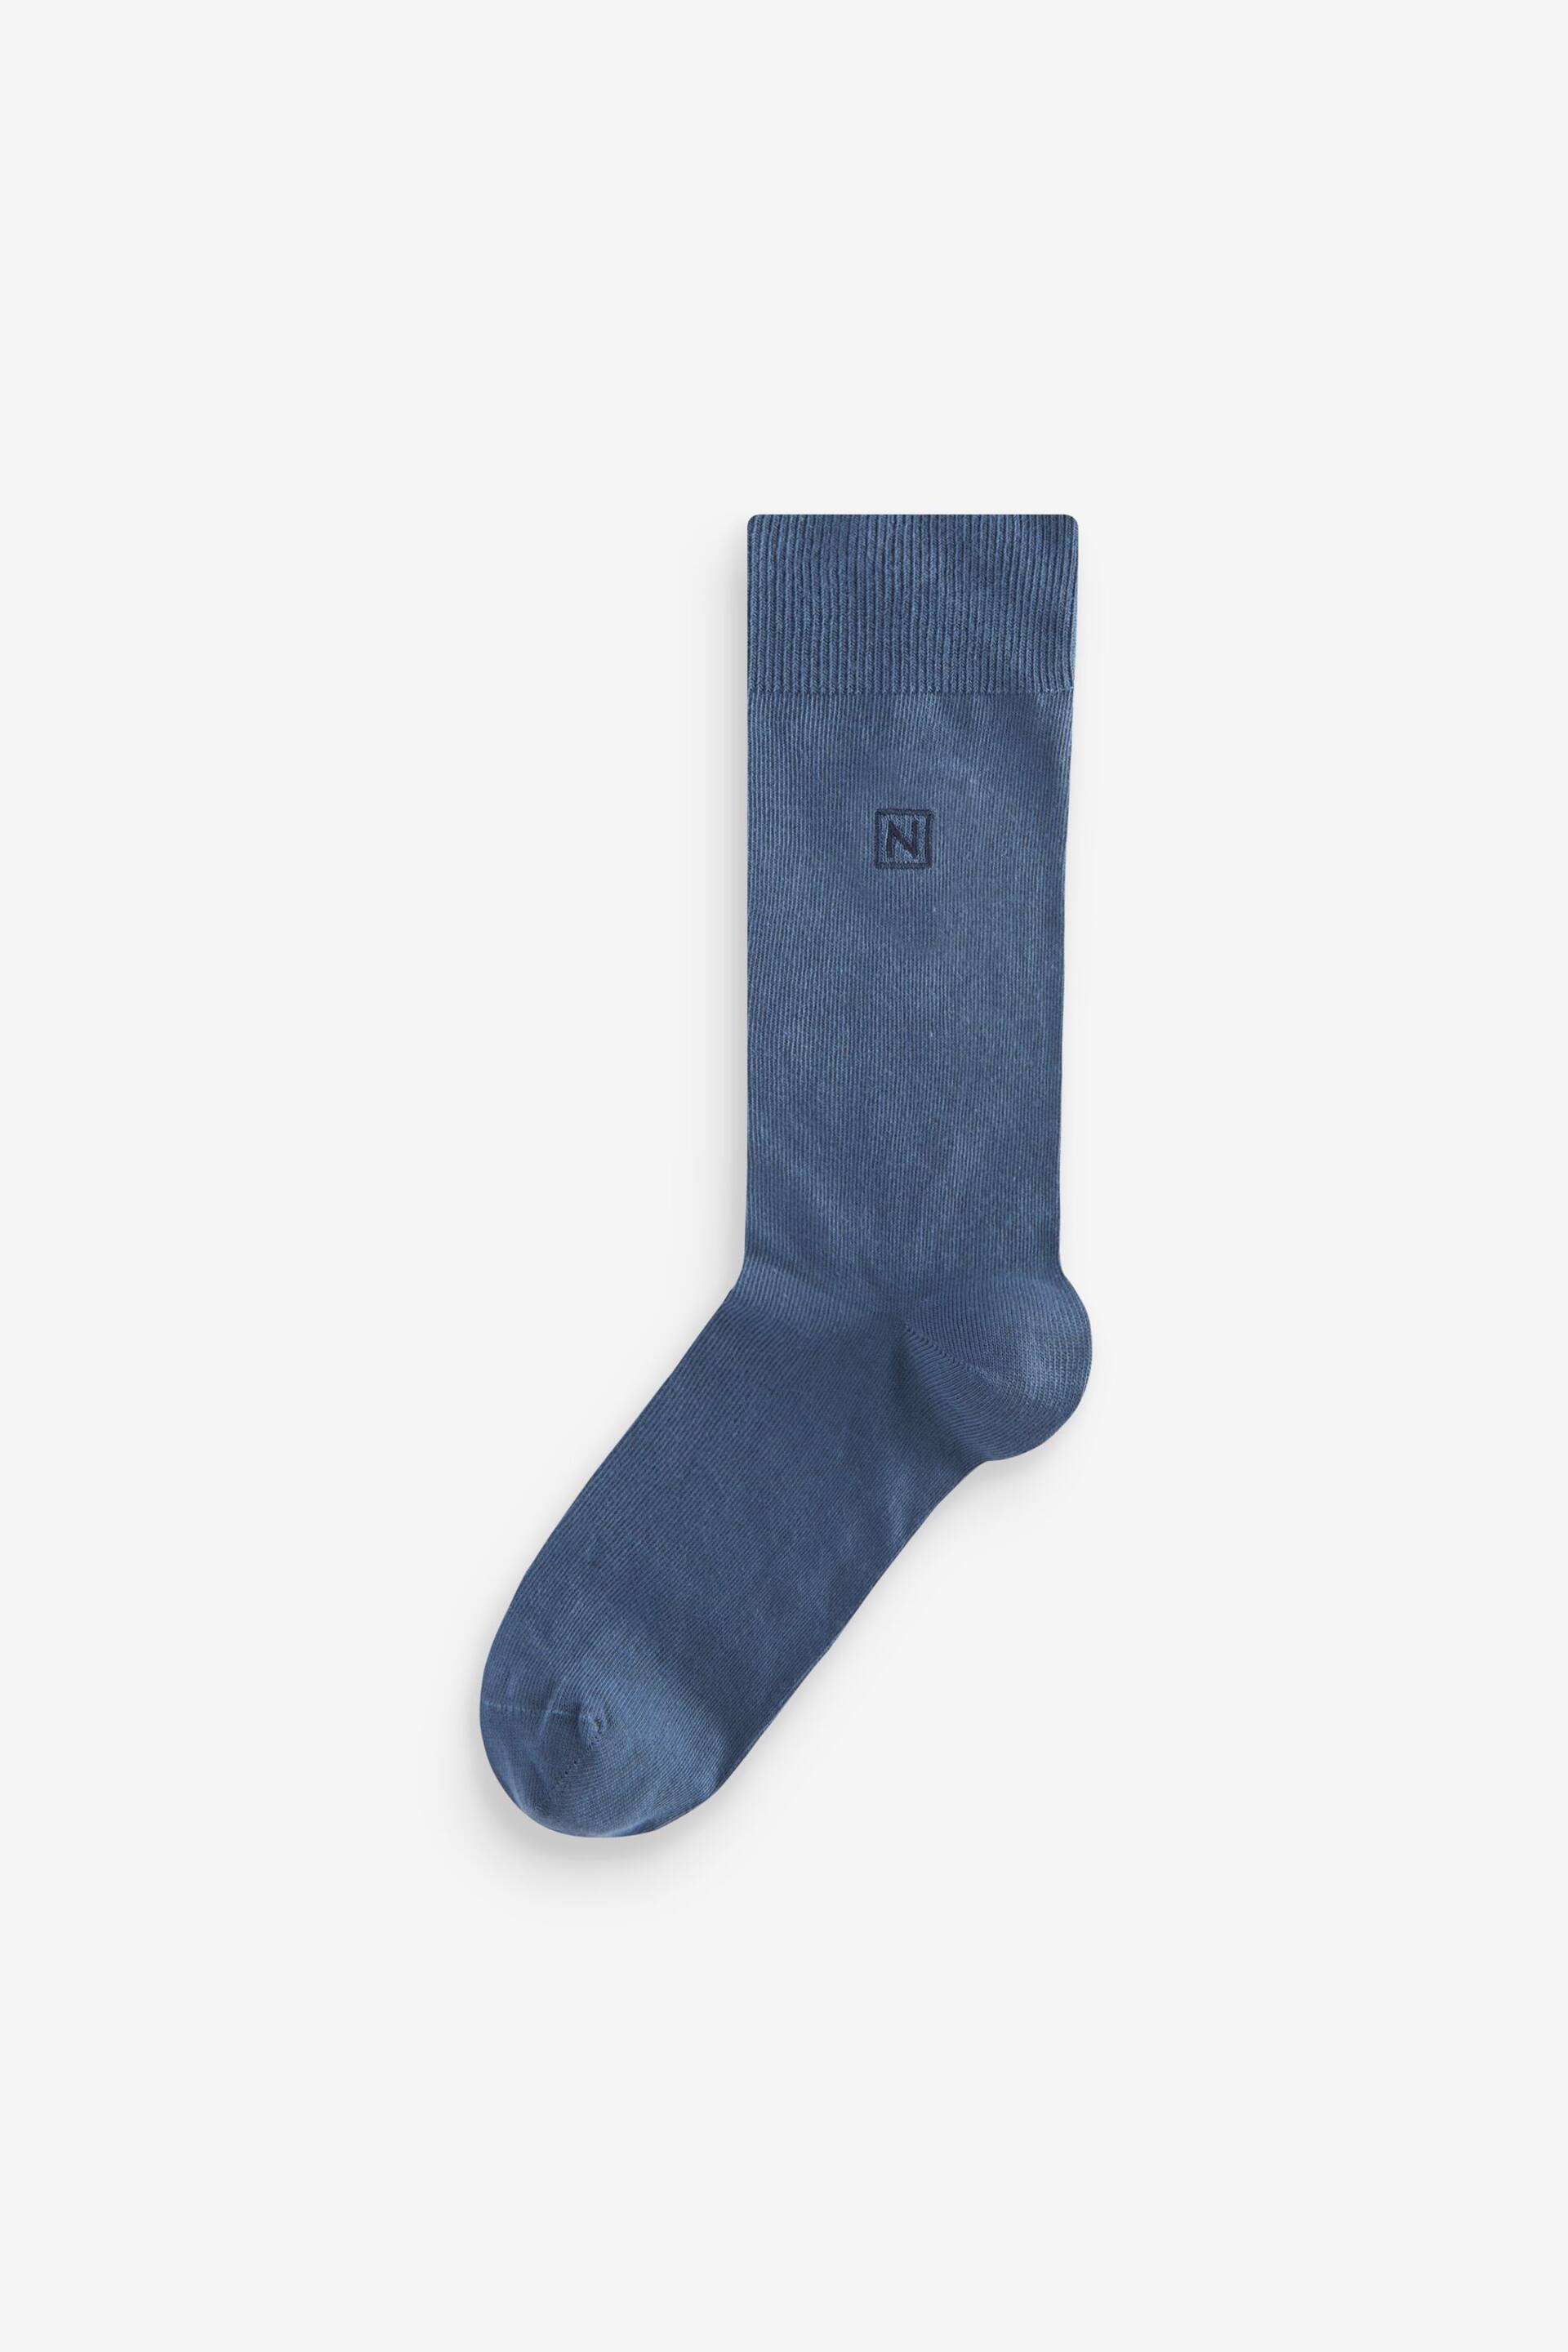 Blue/Grey/Green/Red 8 Pack Embroidered Lasting Fresh Socks - Image 3 of 9